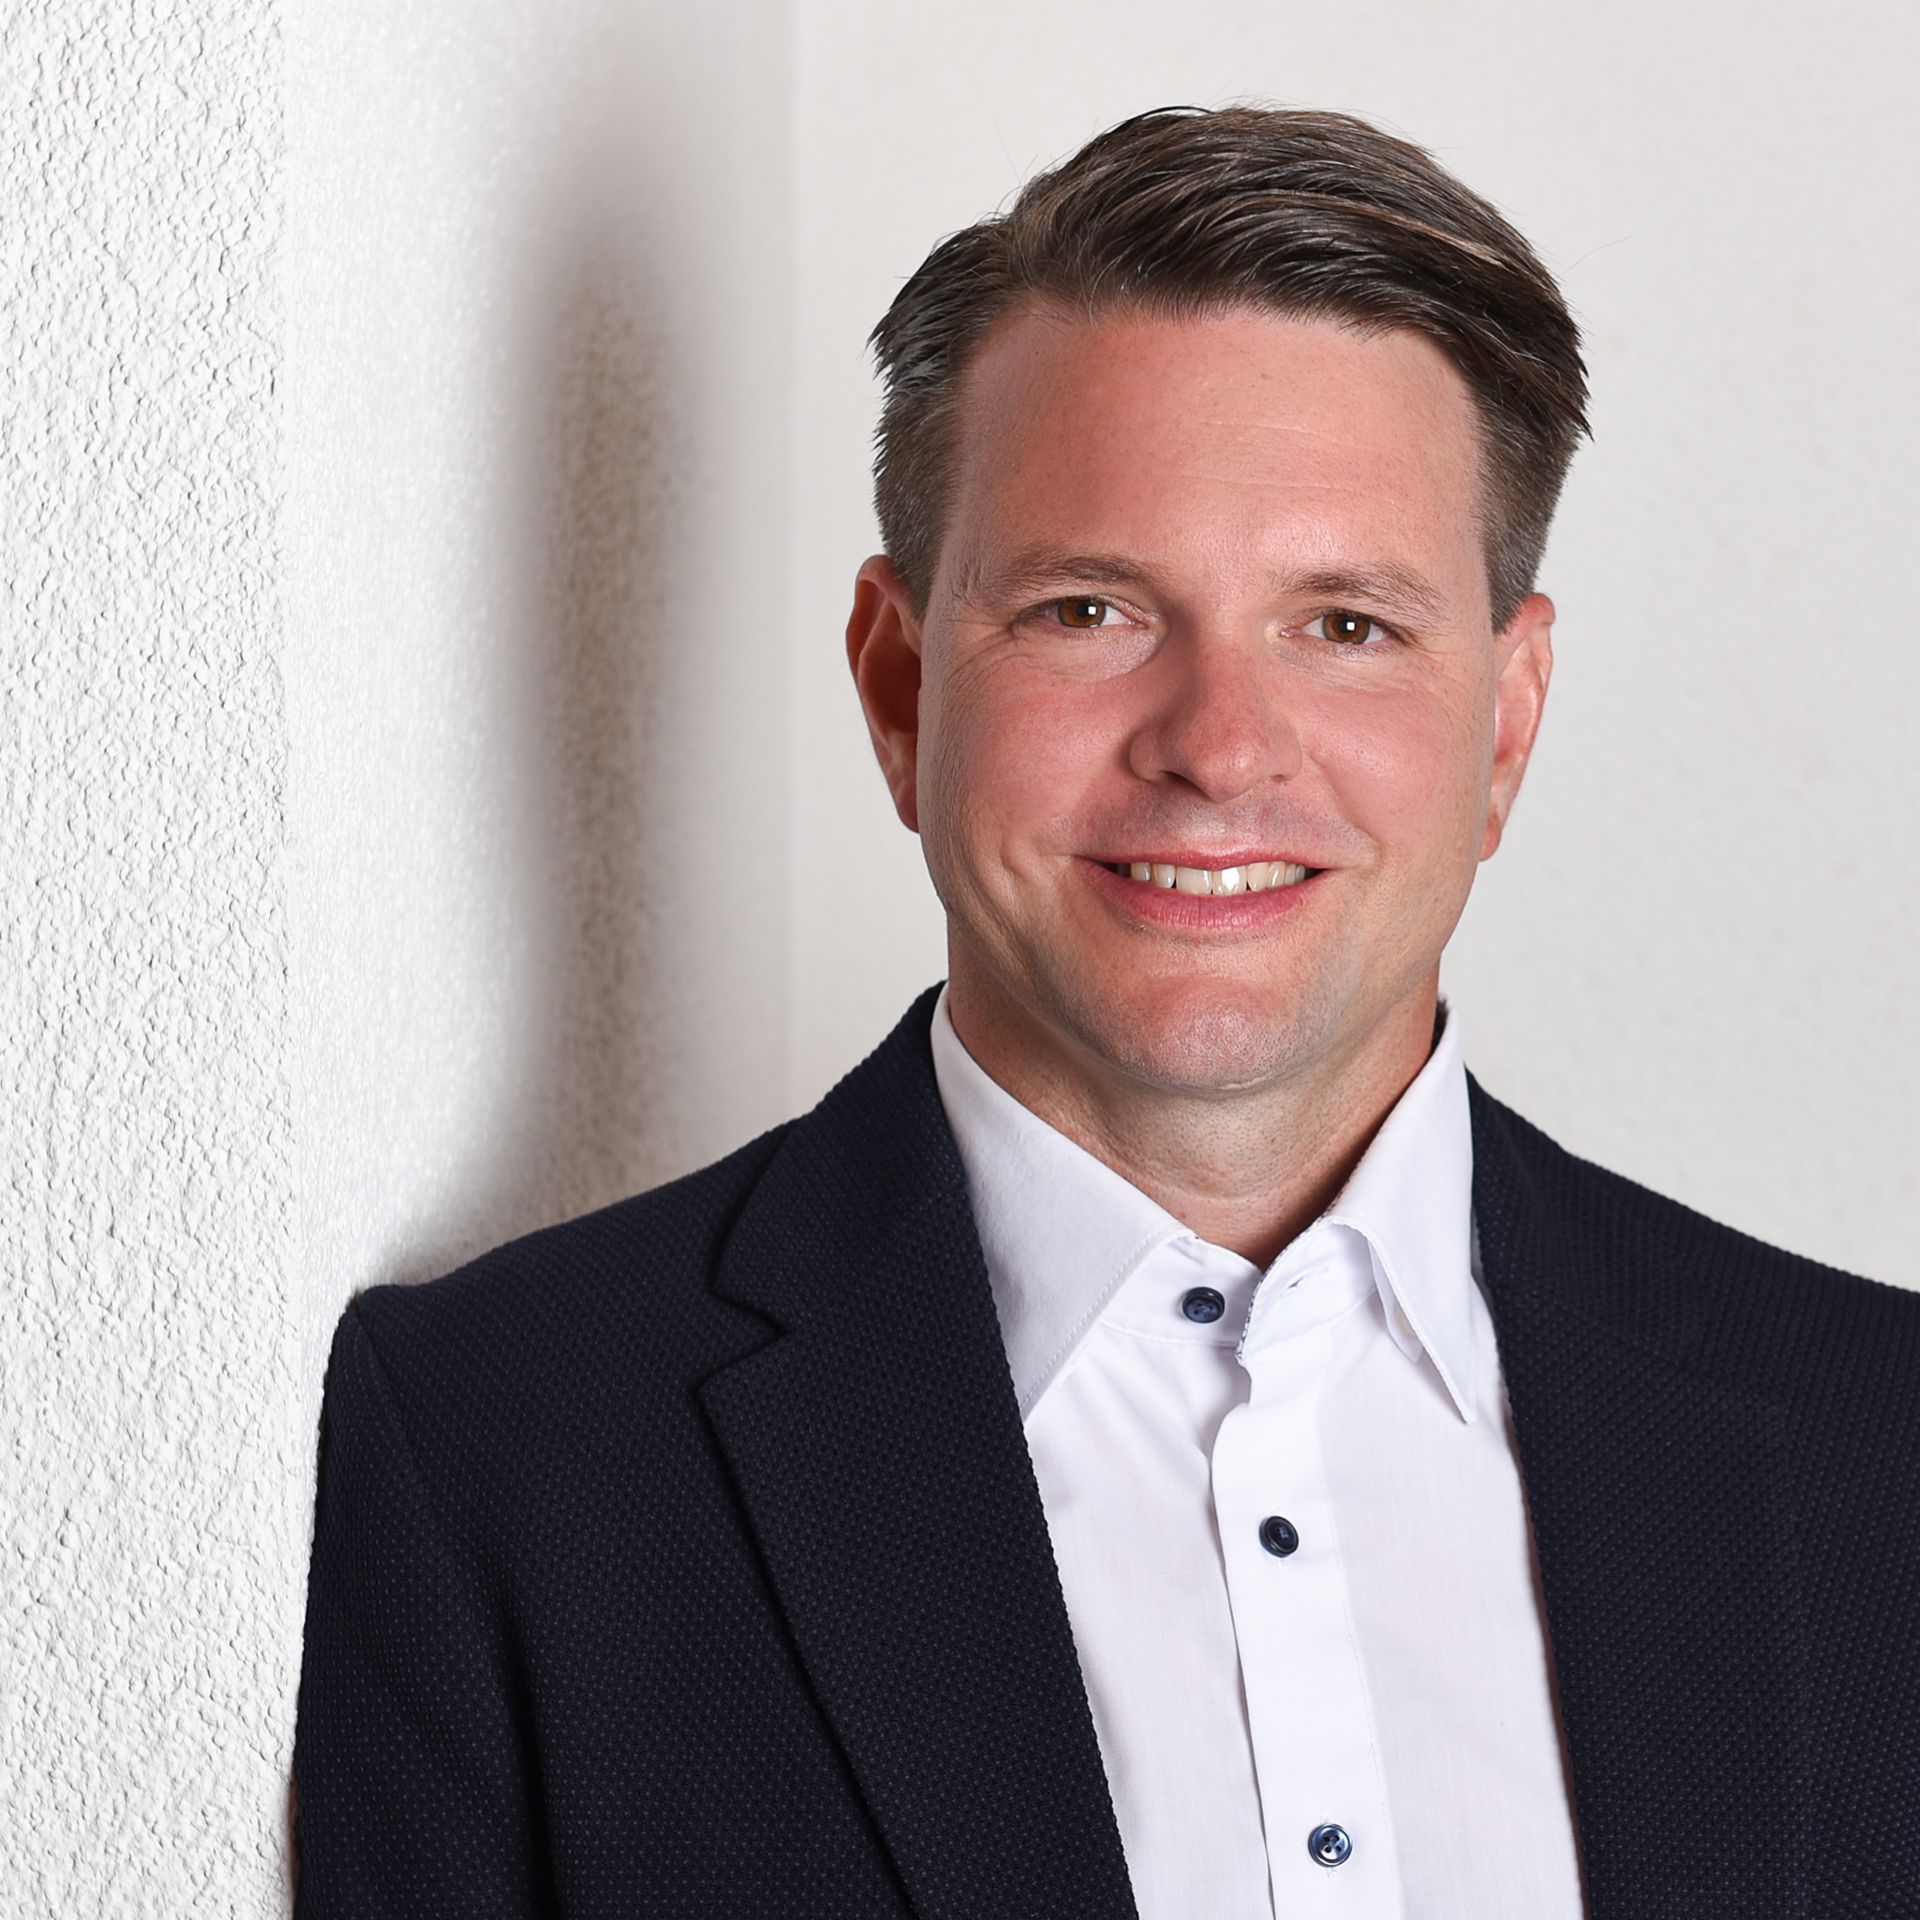 Image of Thomas Döring, Senior Manager Strategic Projects and Business Development of TRATON GROUP